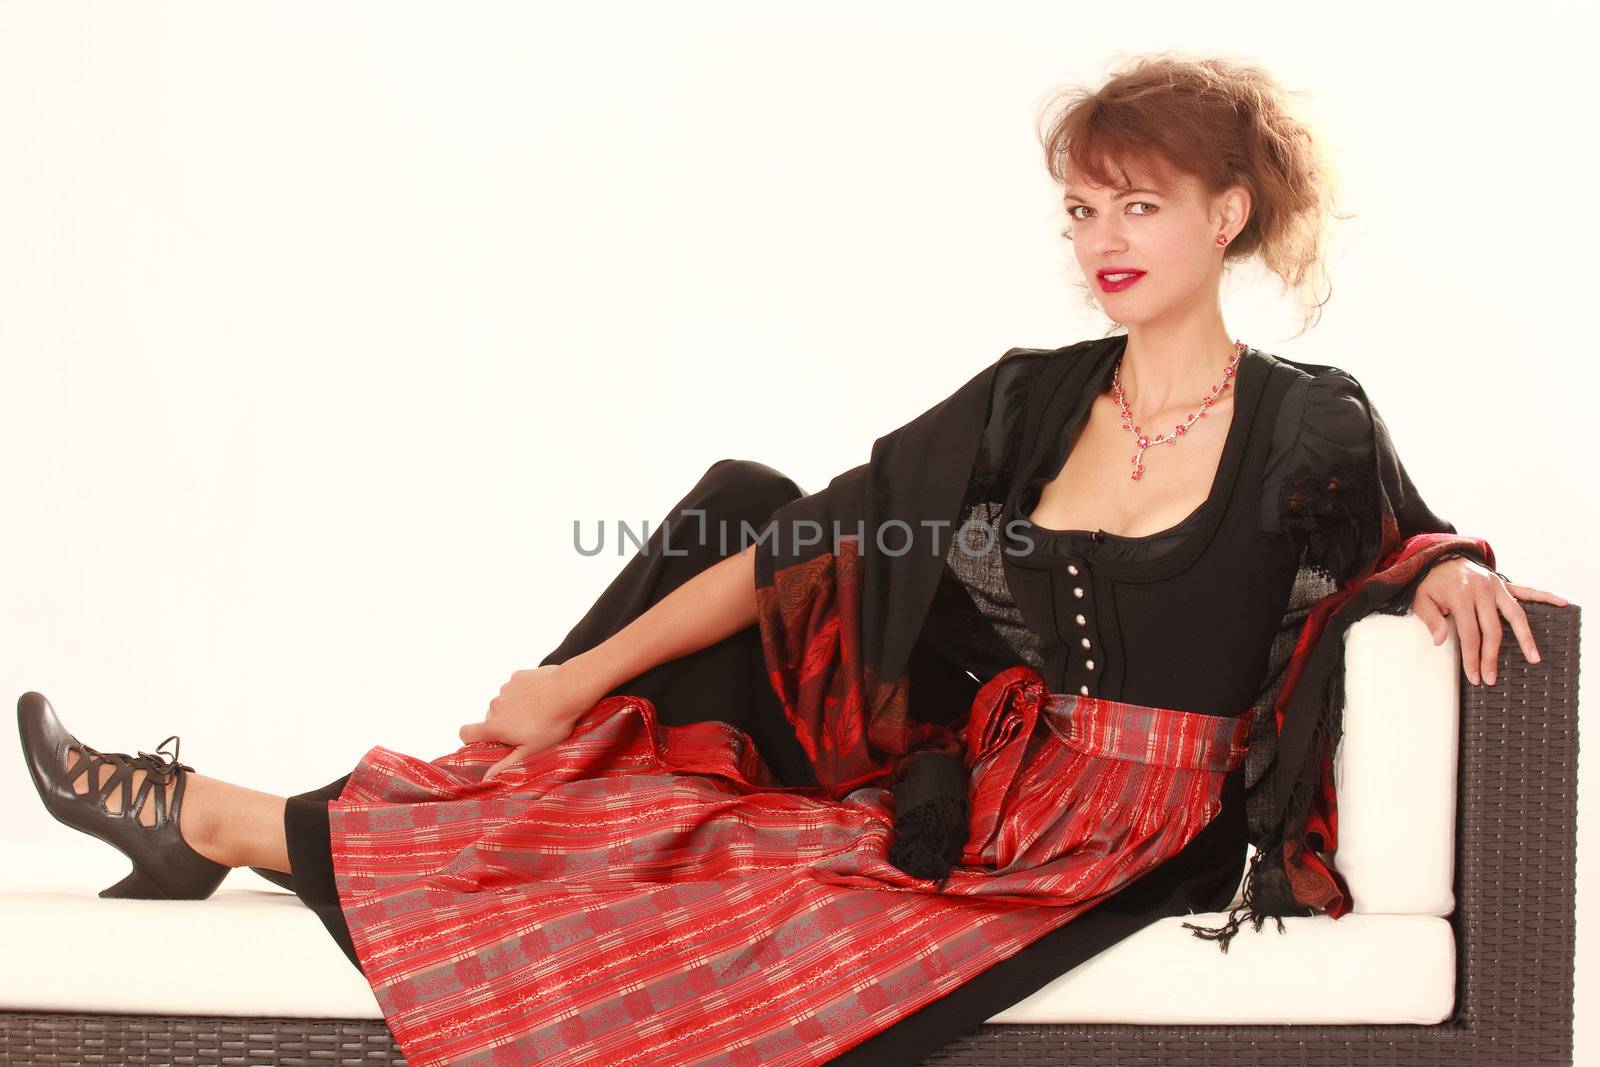 Bavarian woman in traditional dress on a sofa at rest